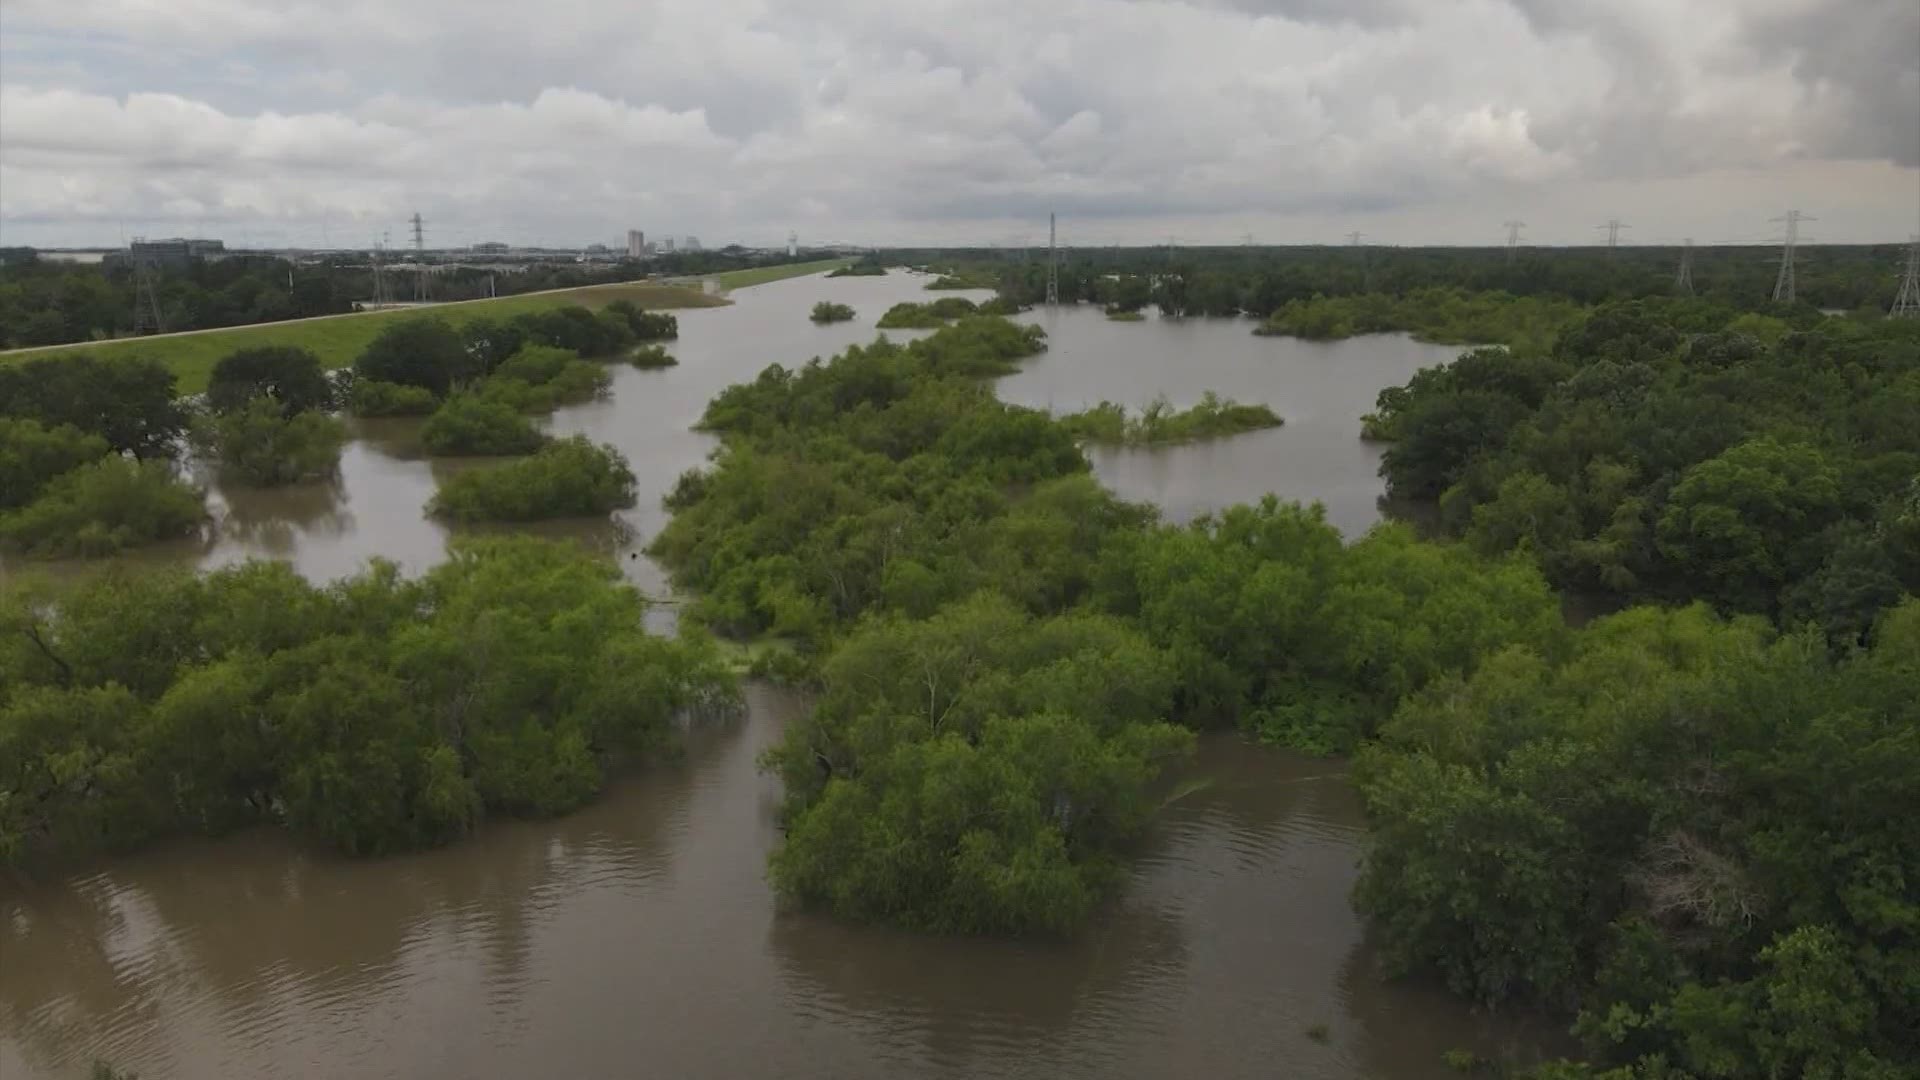 The Harris County Flood Control District does not anticipate impacts on homes or businesses.